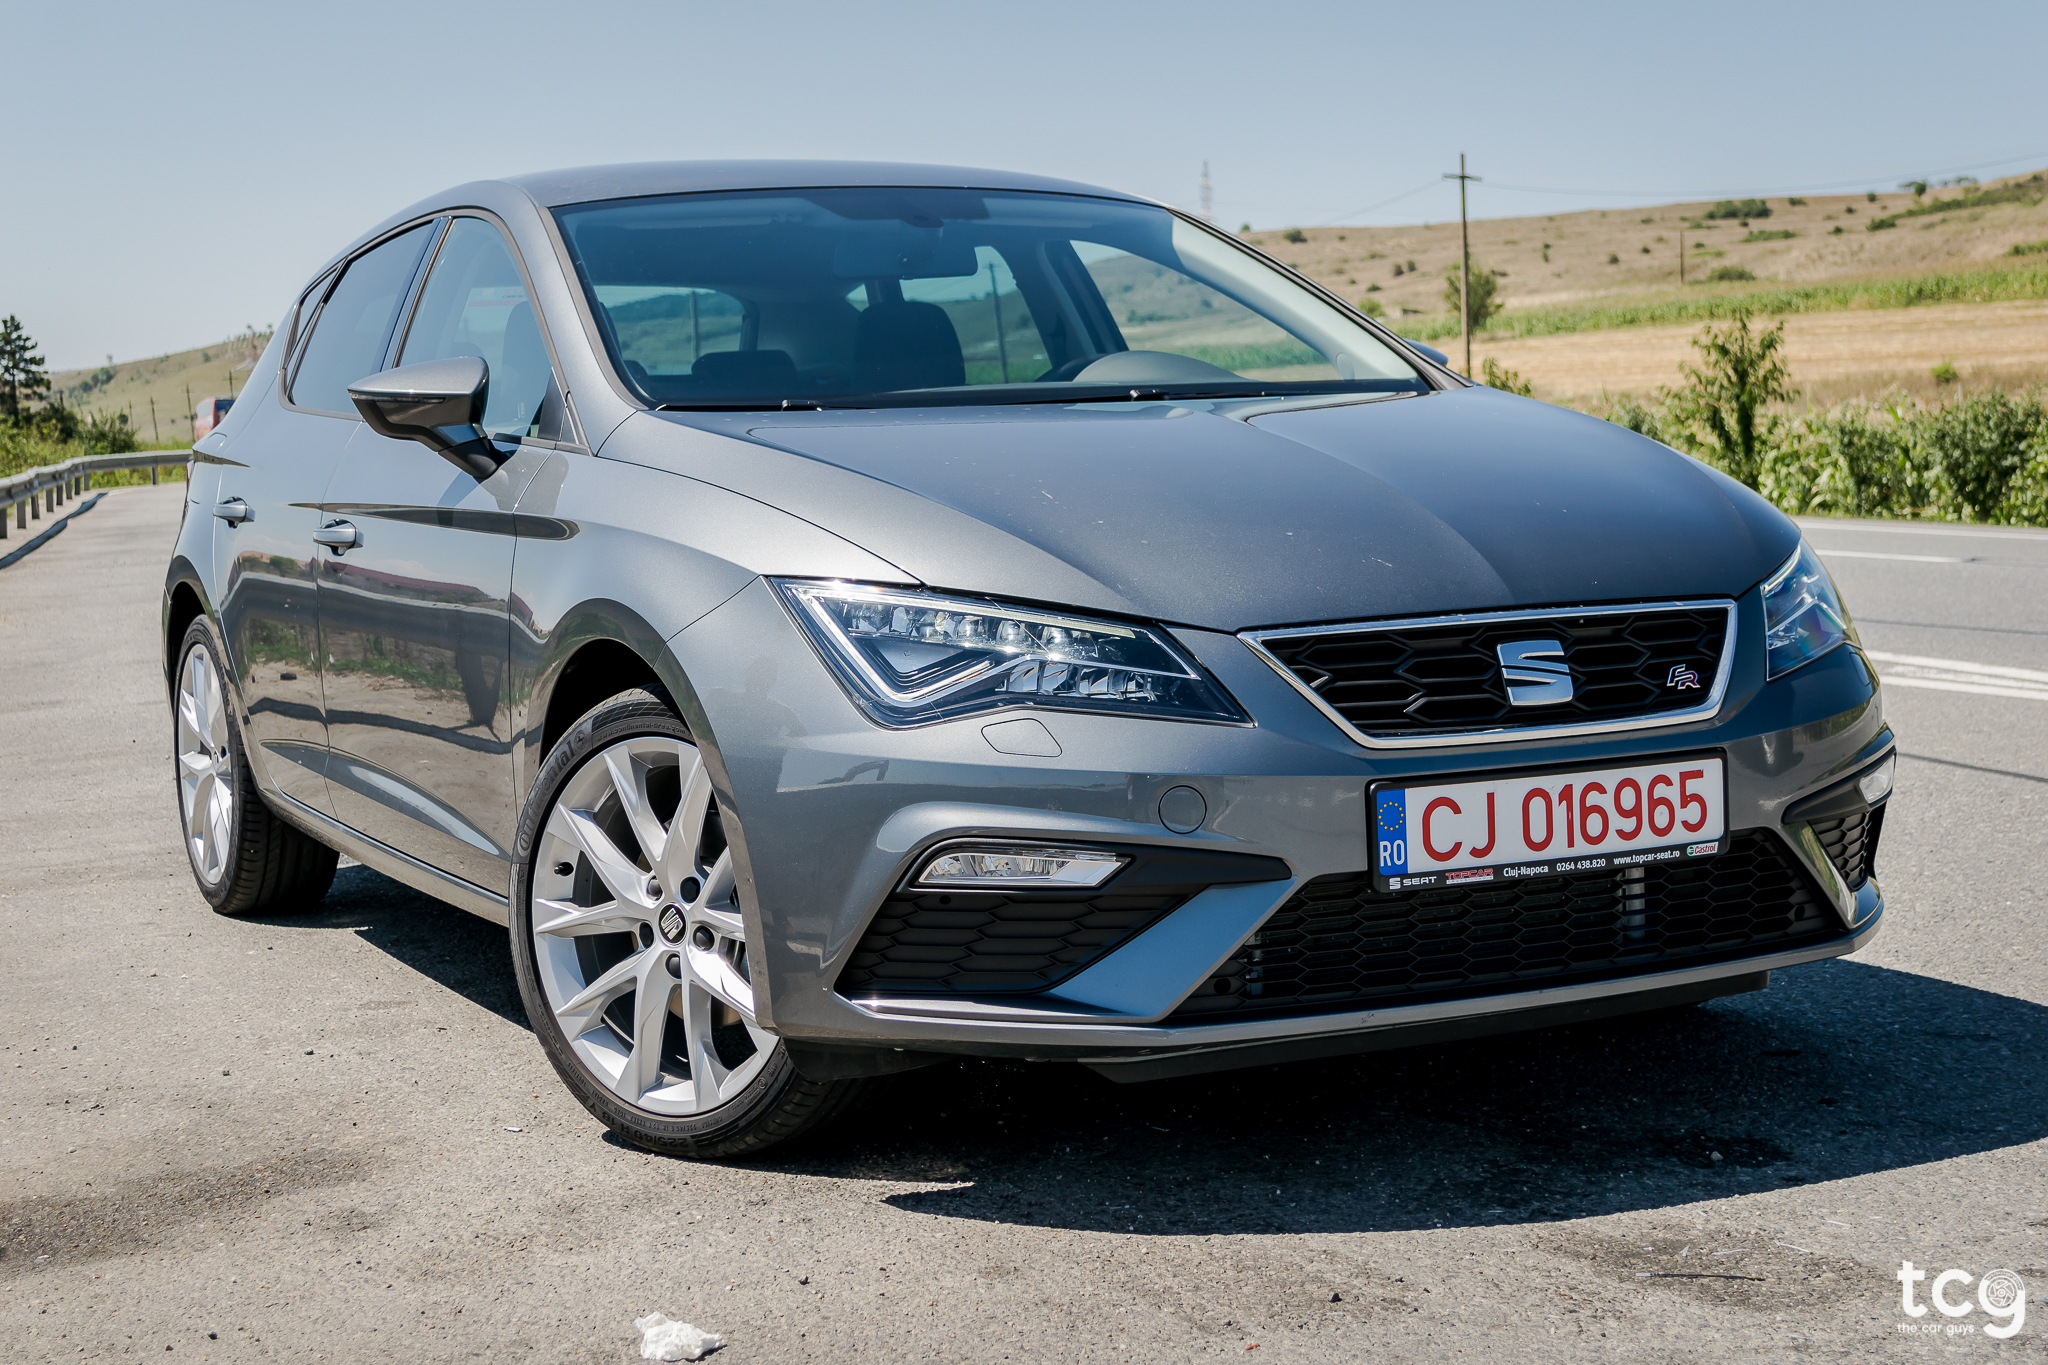 Seat Leon FR - More than just good looks!